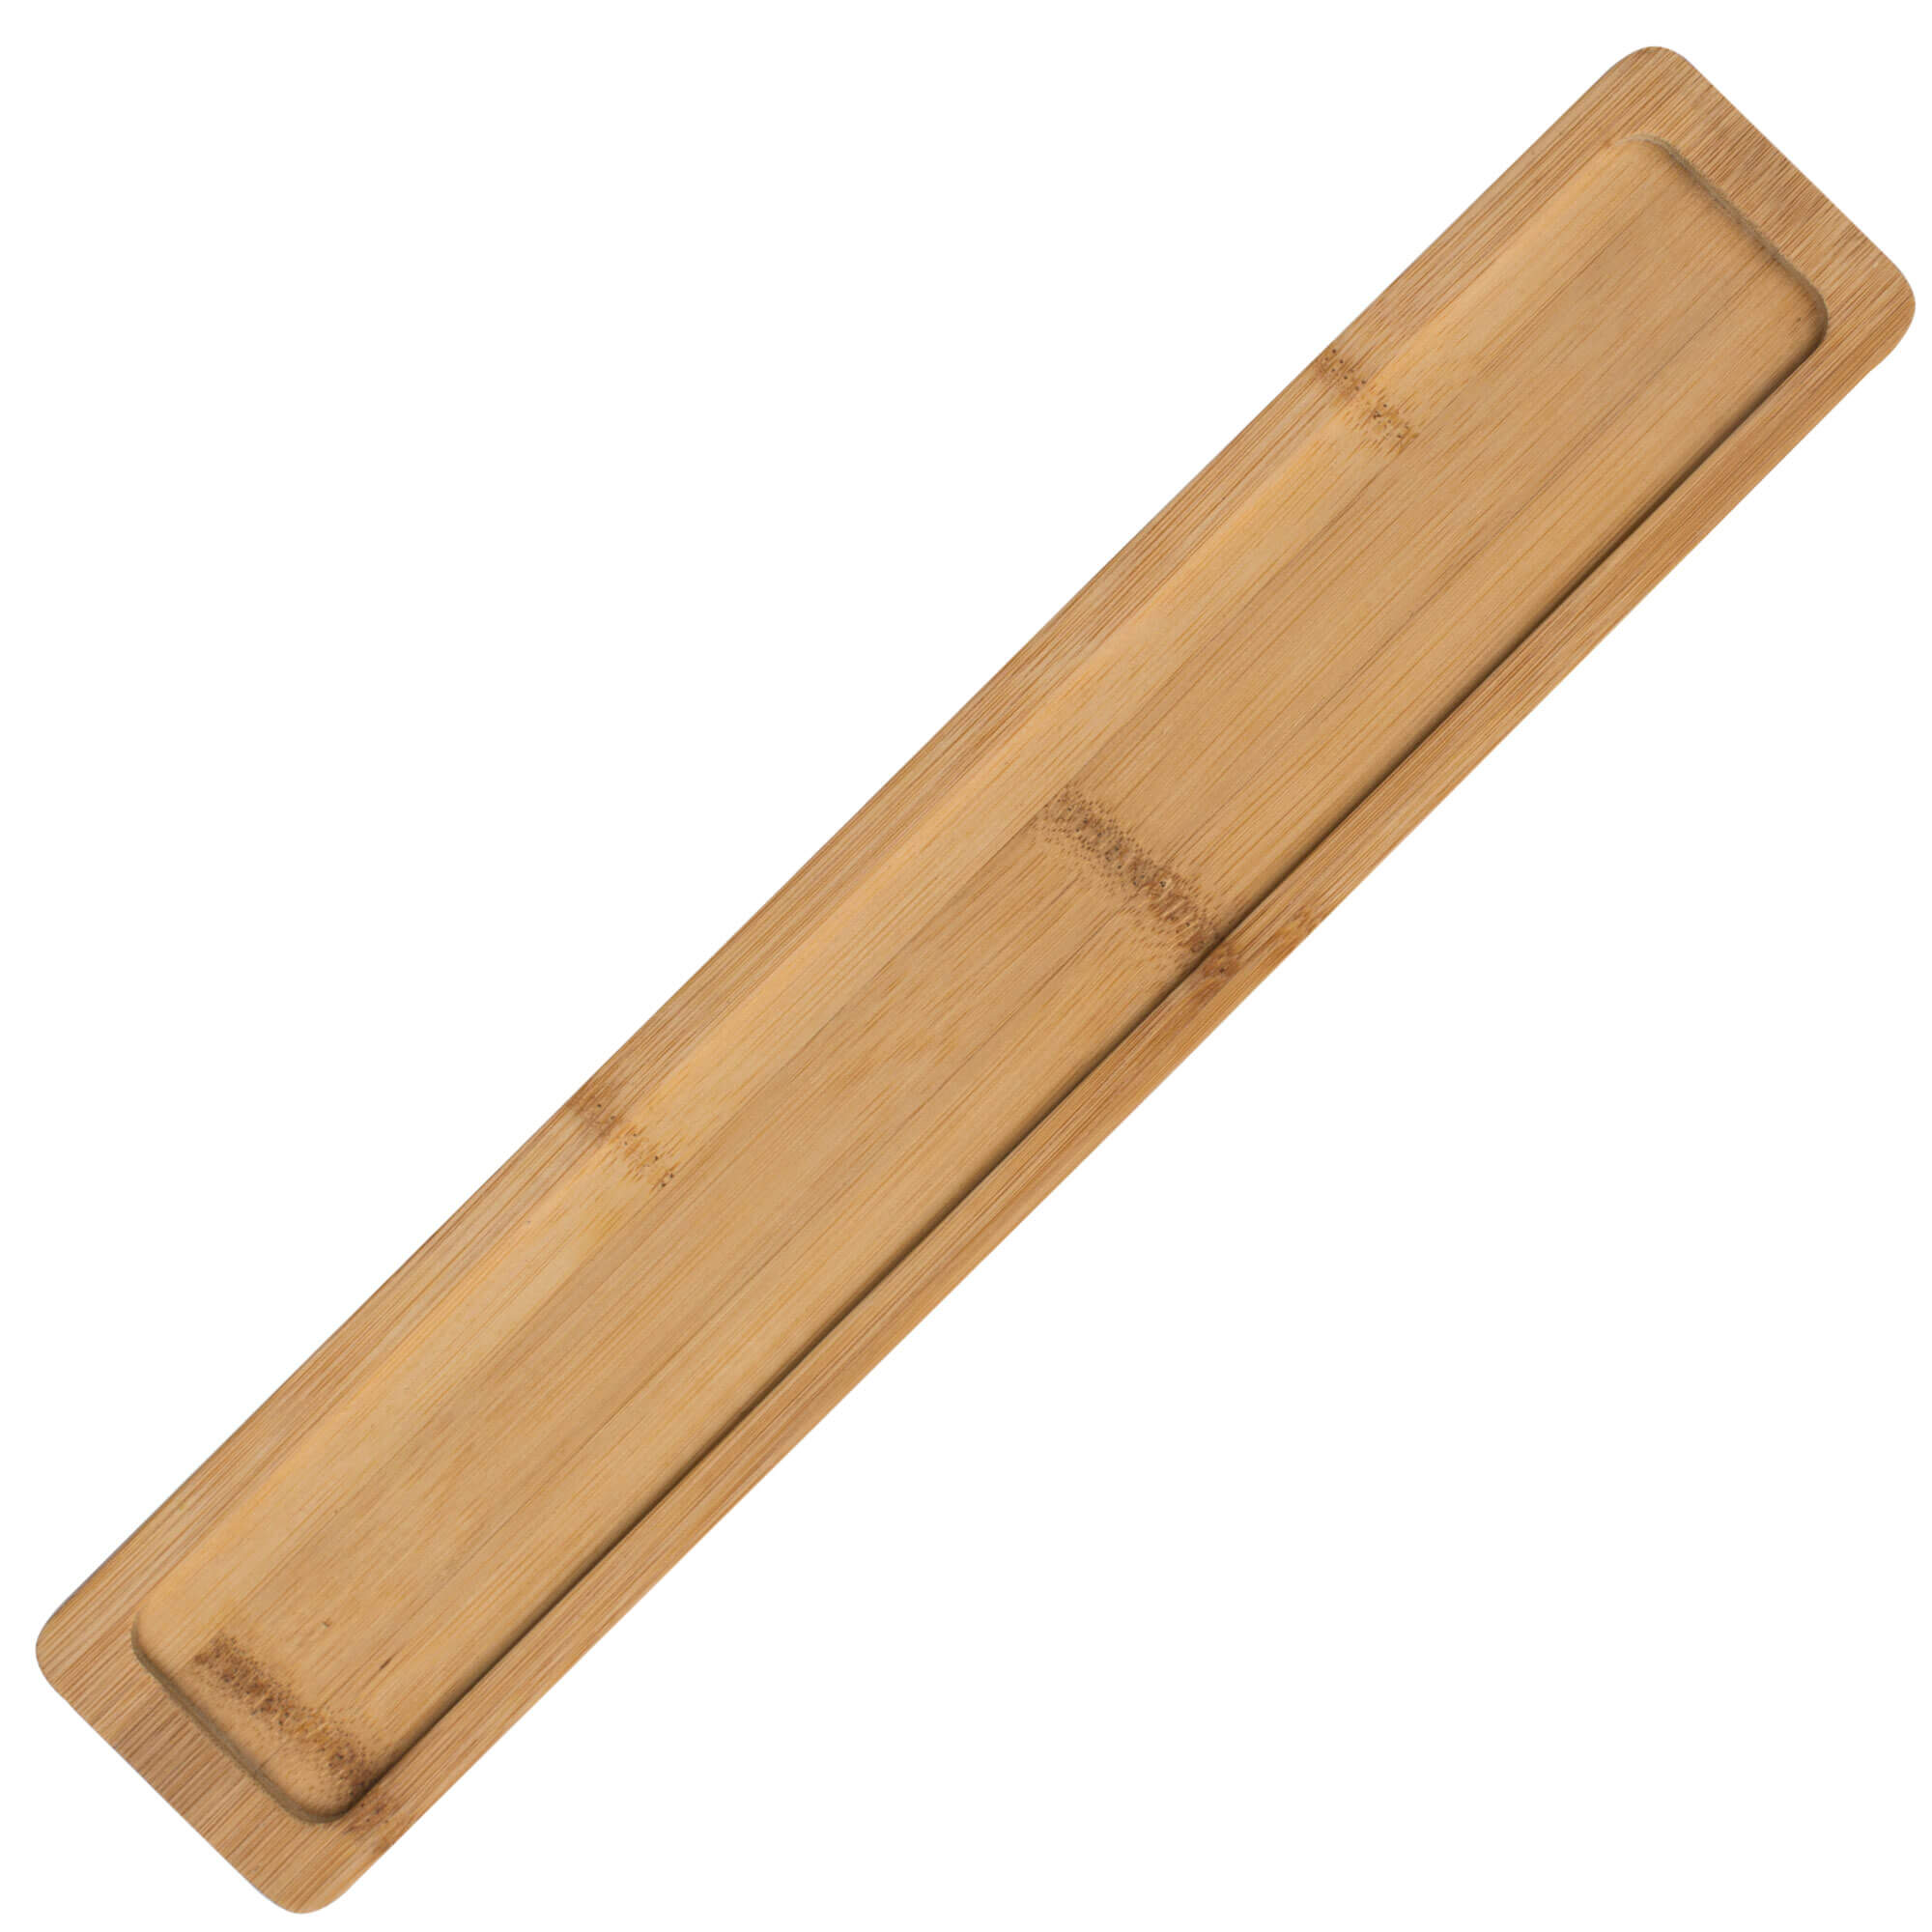 Serving tray bamboo - 40x7,2cm